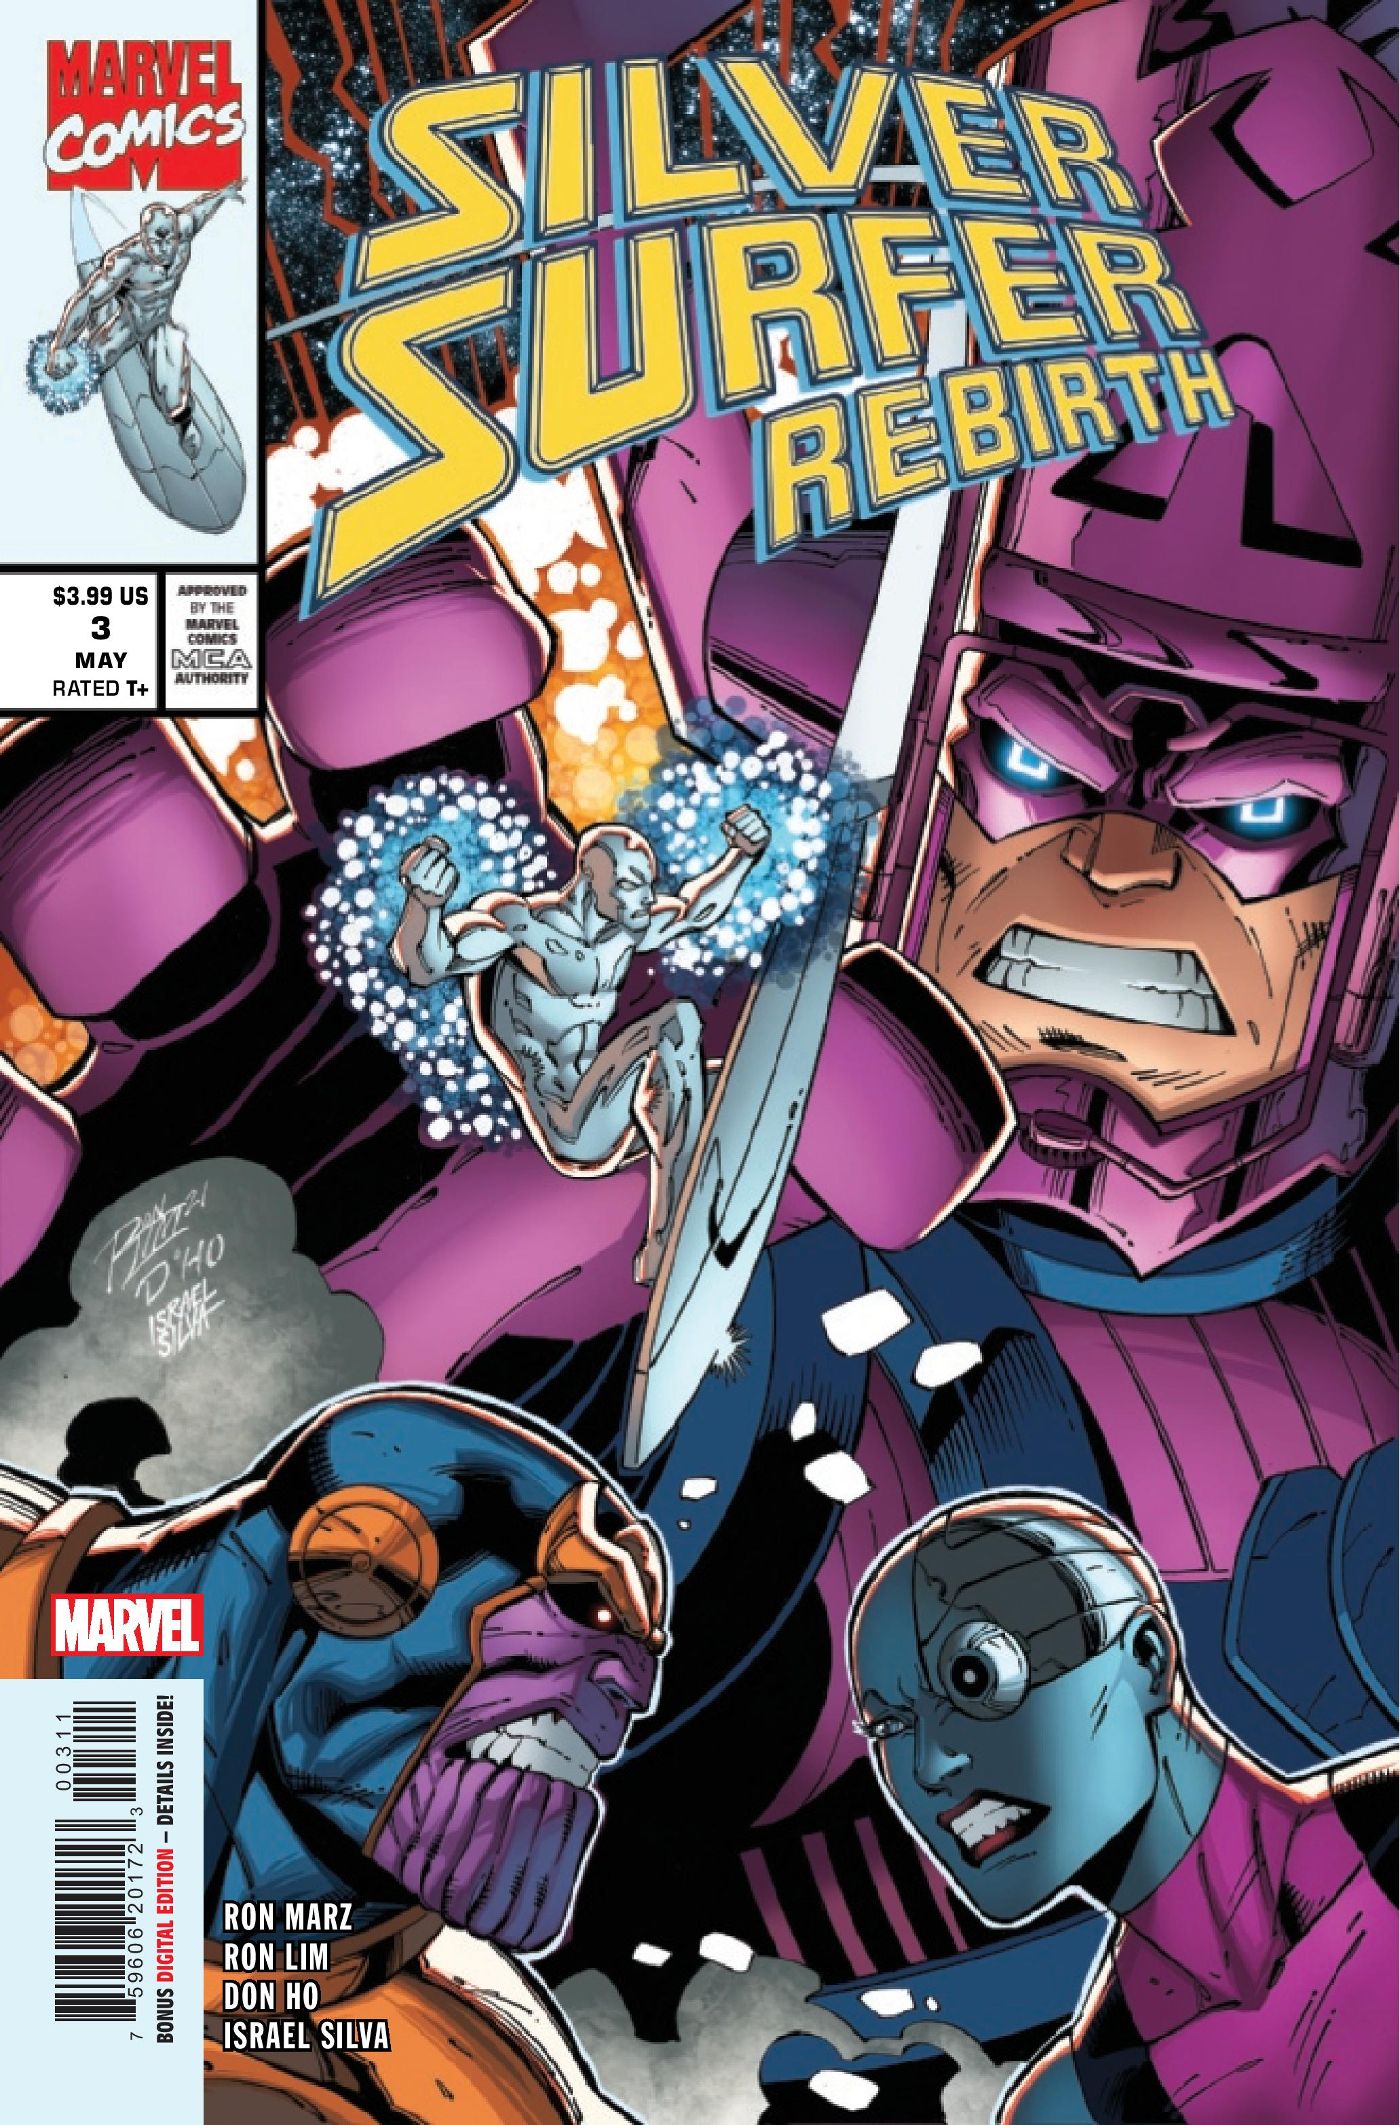 The Reality Stone Is Forcing Silver Surfer To Relive His Galactus Trauma